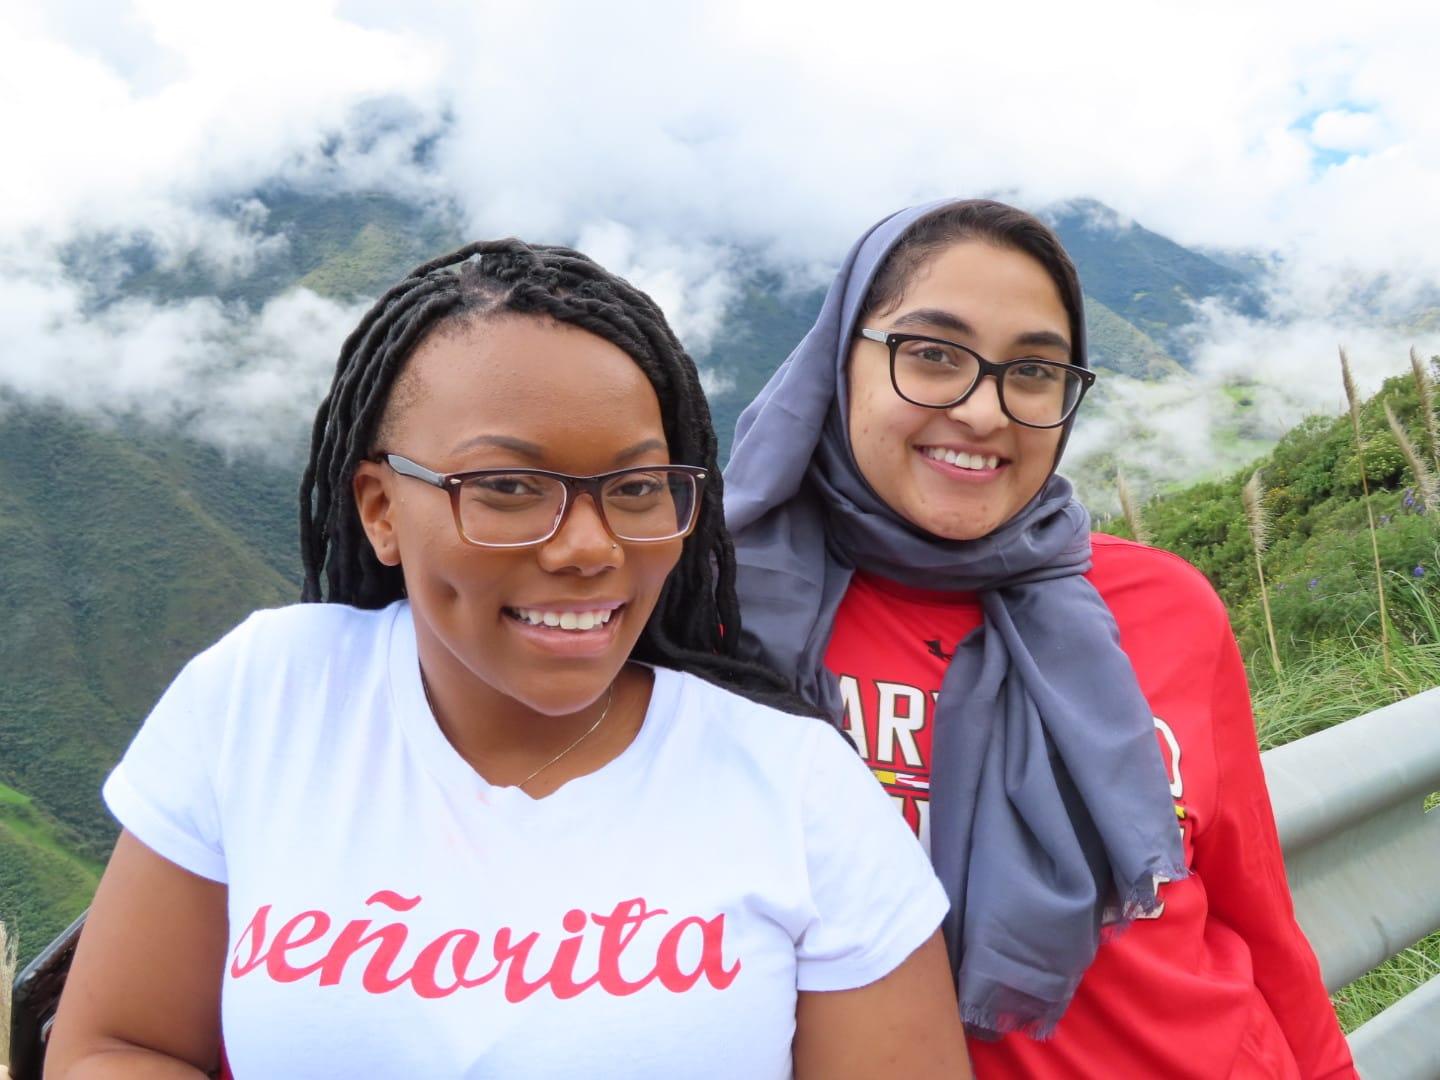 Students pose on a mountaintop.